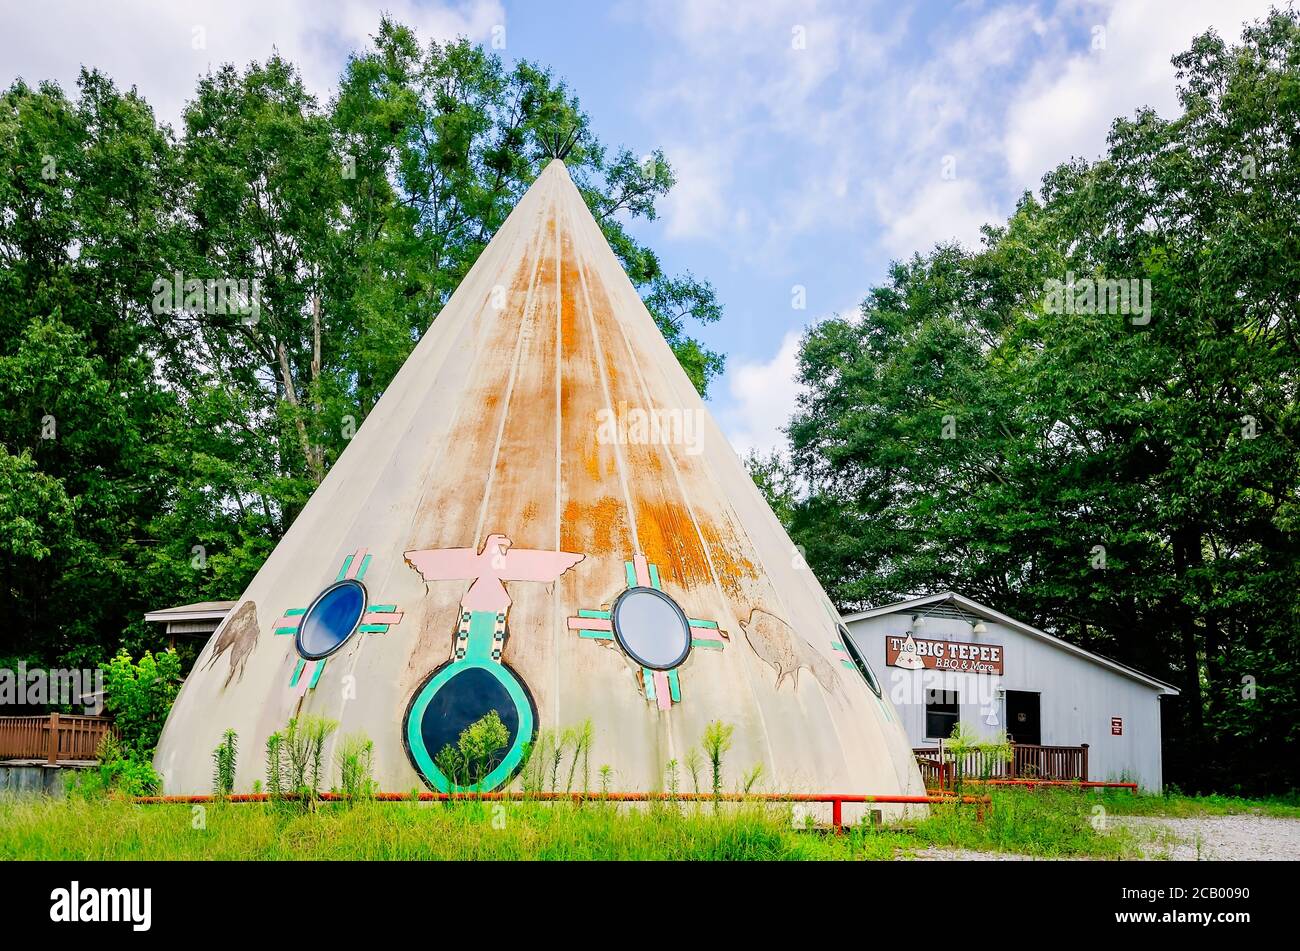 The Big Tepee barbecue restaurant, also called Big D’s Tepee, is pictured, Aug. 7, 2016, in Pocahontas, Mississippi. Stock Photo